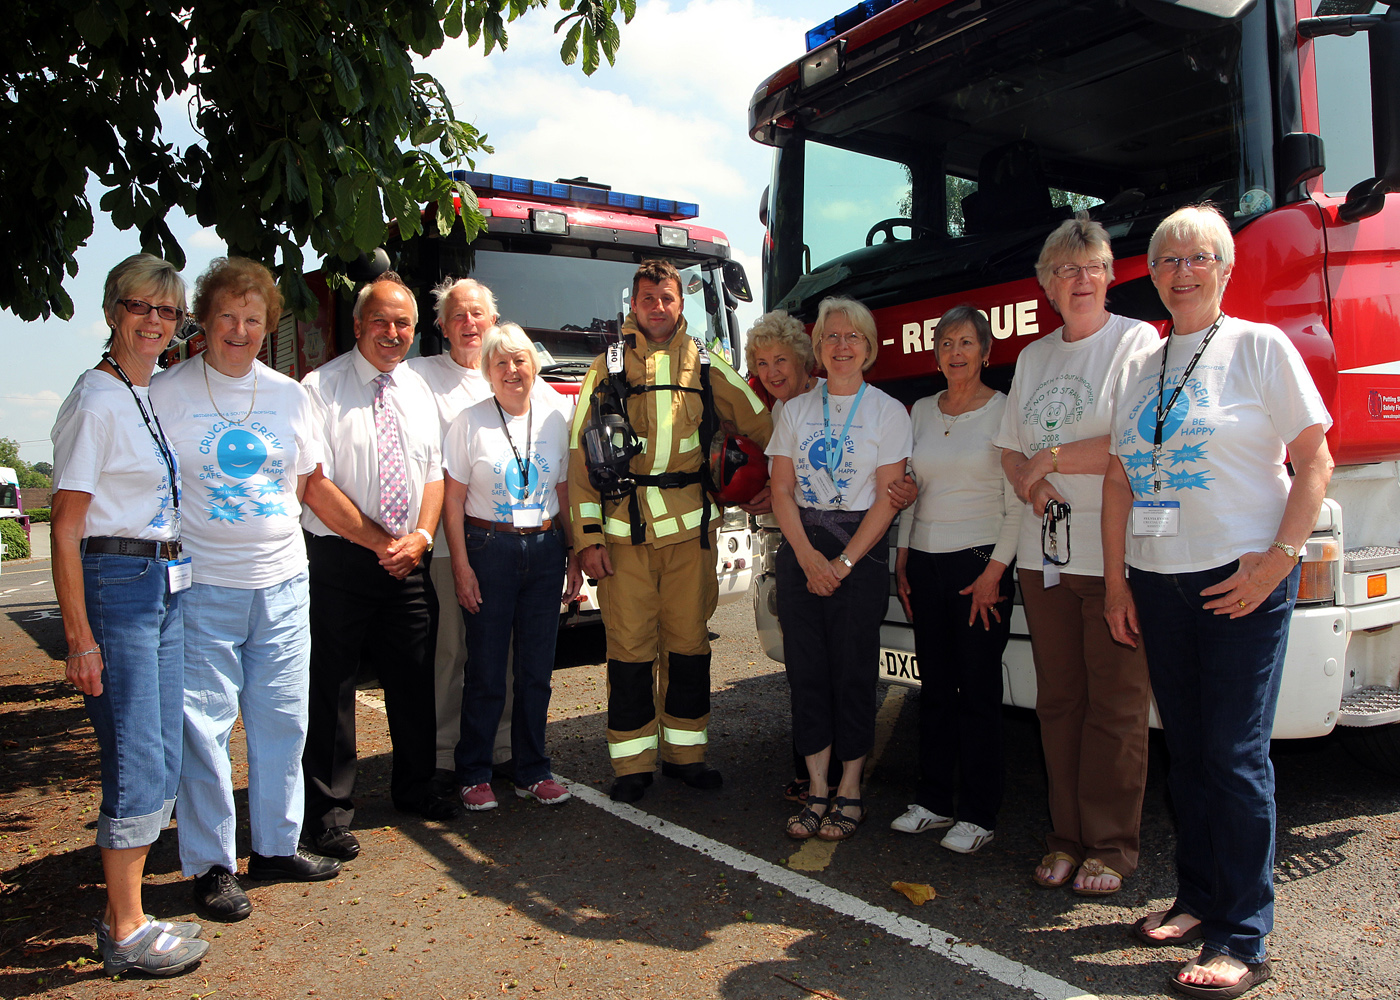 Fire Authority member with Crucial Crew volunteers in Shropshire